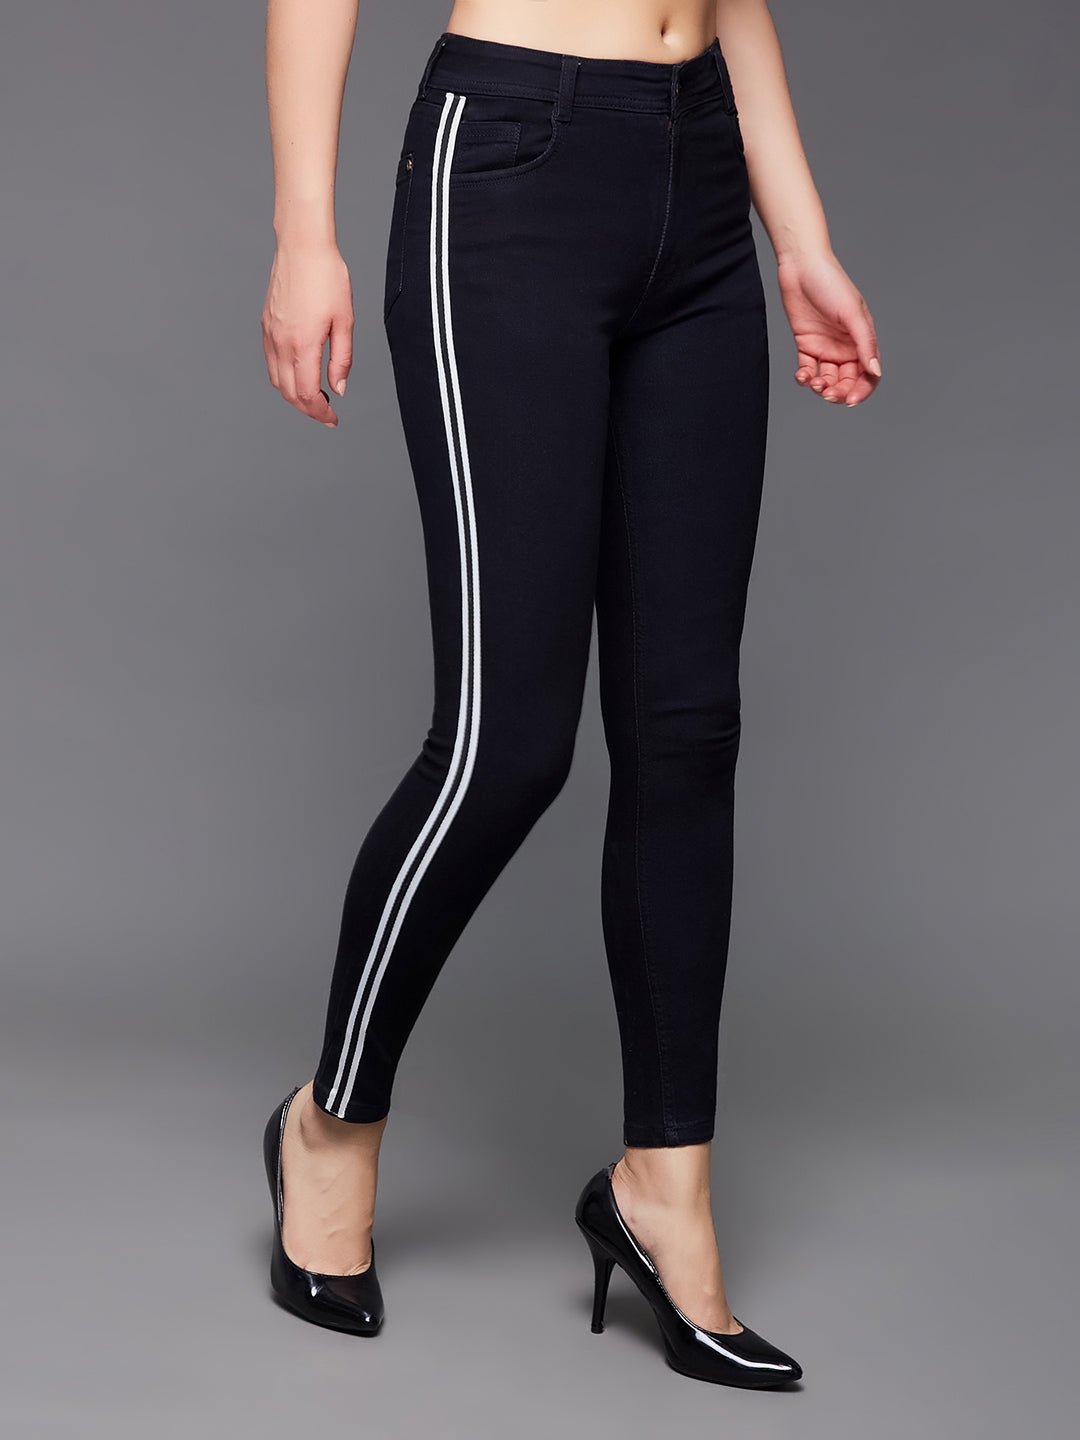 MISS CHASE | Black Slim-Fit Mid-Rise Clean Look Regular-Length Stretchable Denim Jeans